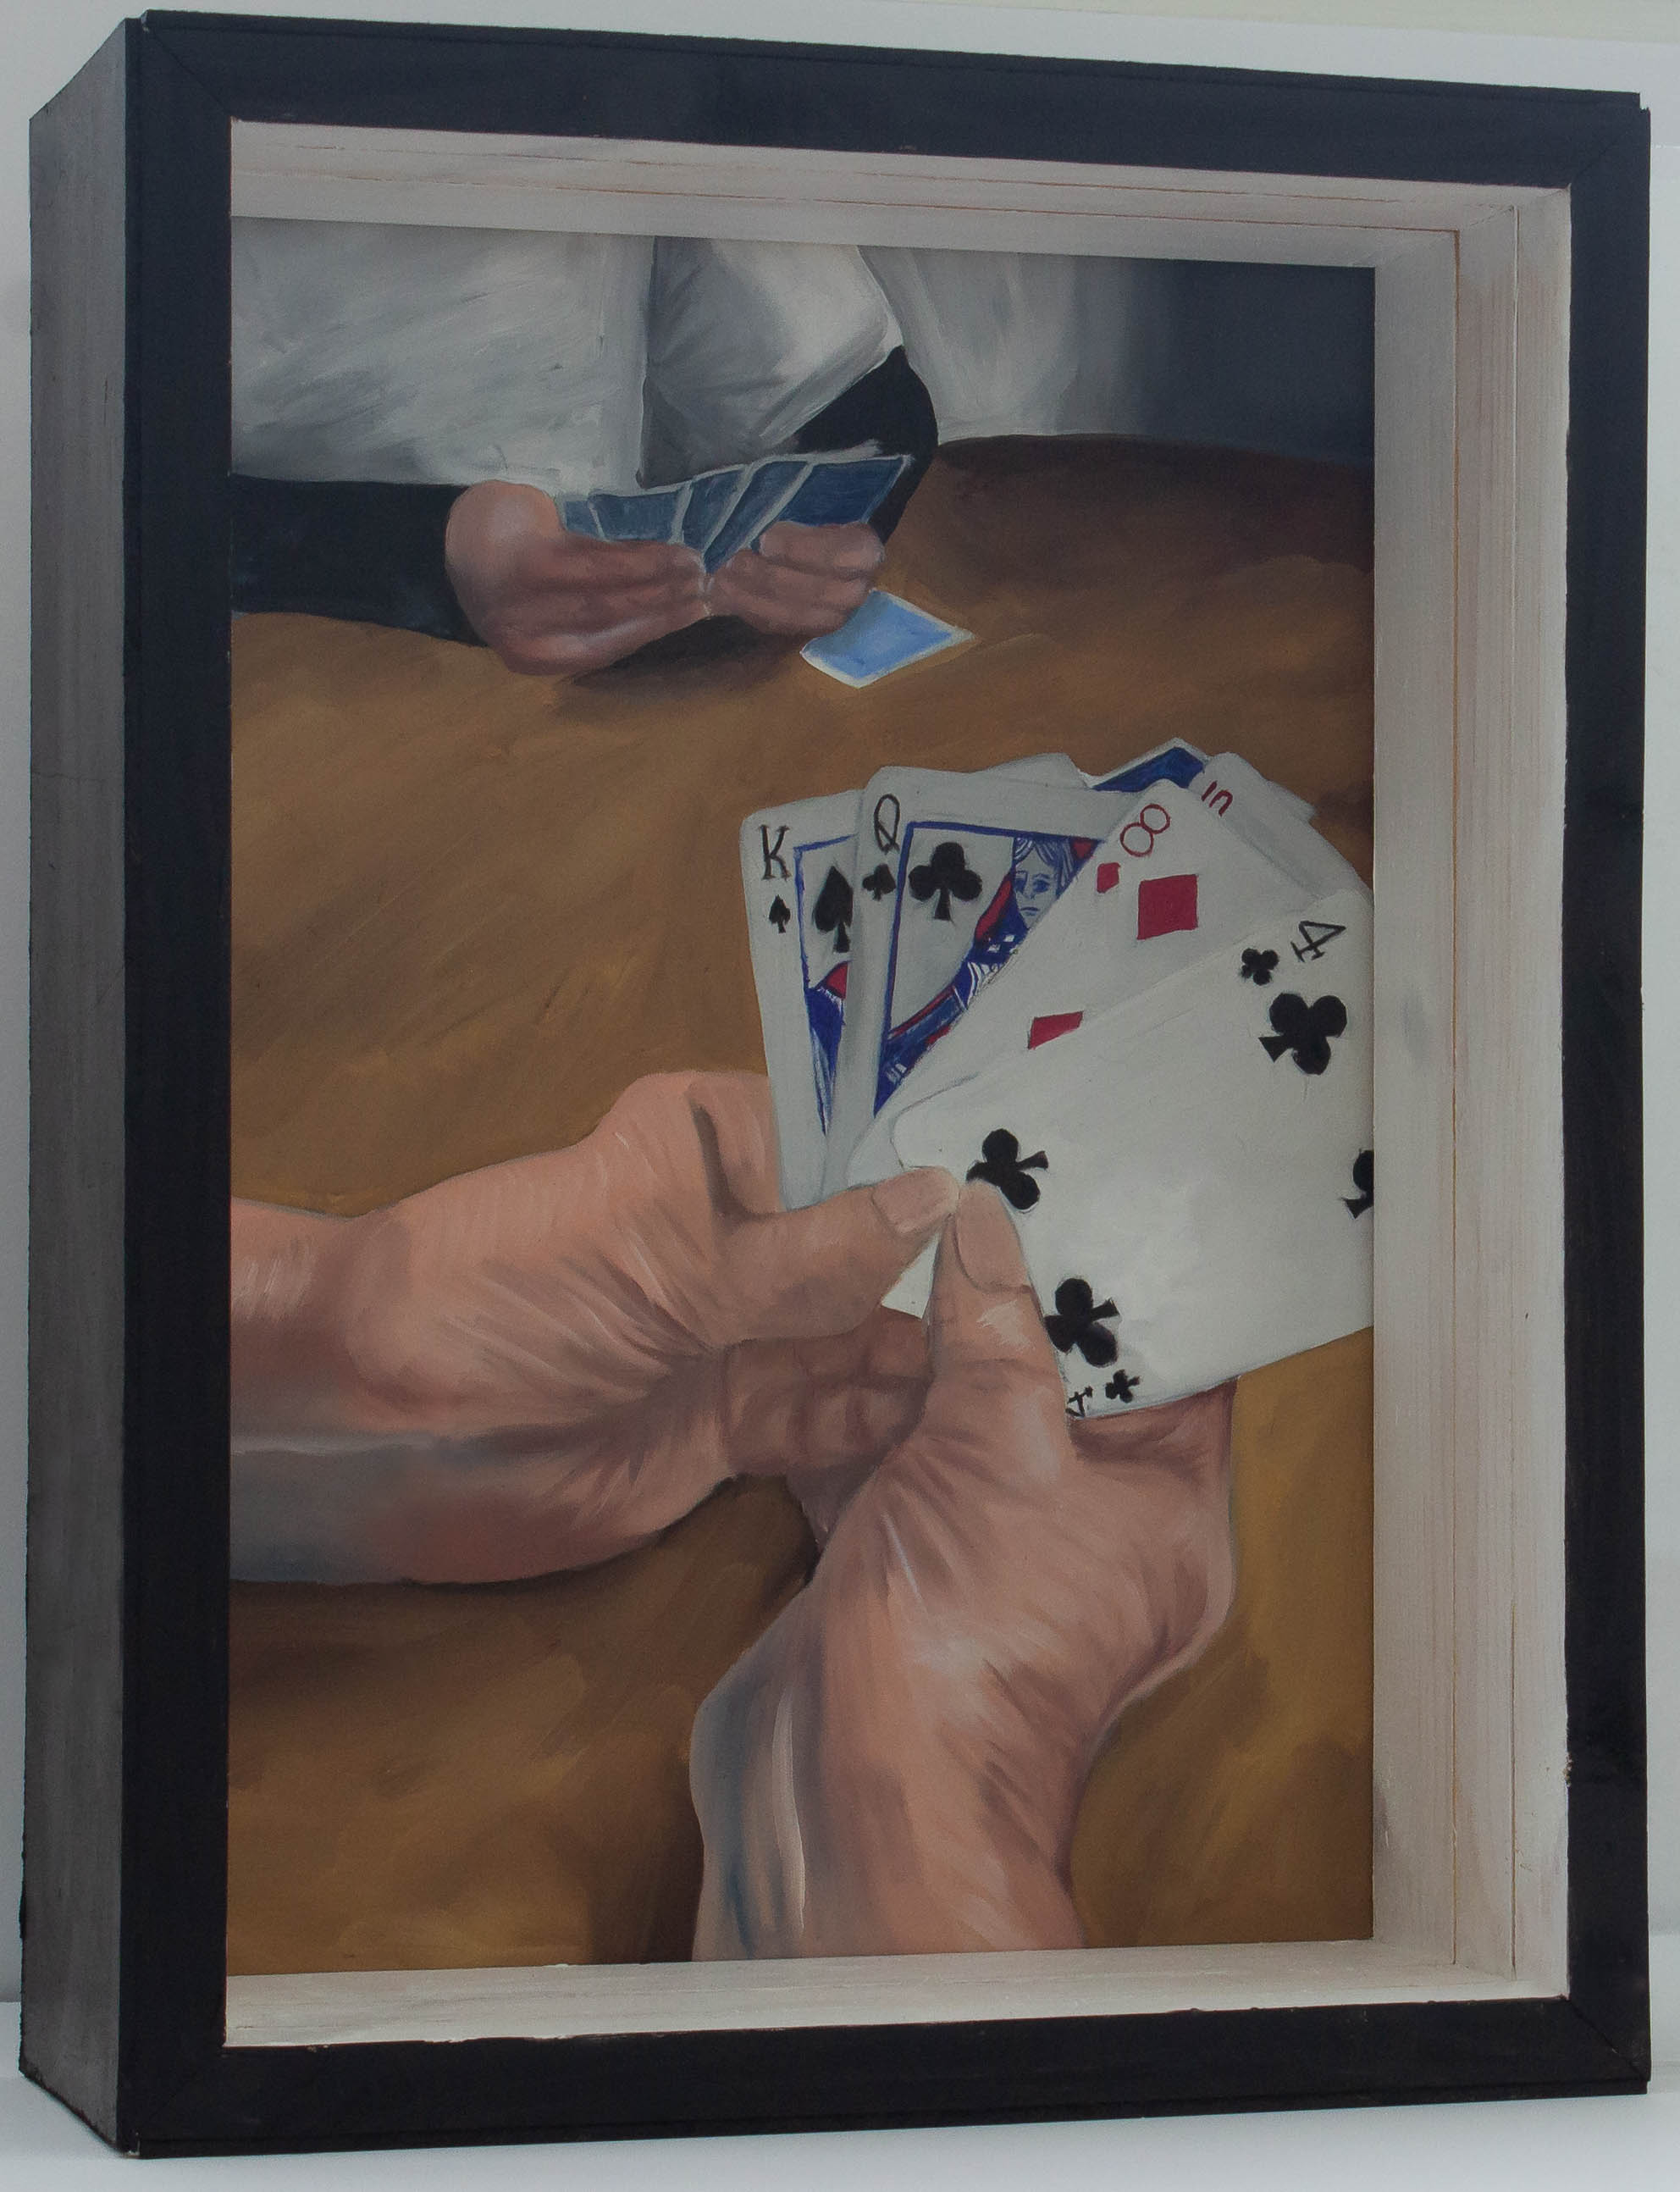 A box with a painting in the back and treated plexiglass panels interfering with the view of the painting. The painting shows an older person’s hands holding playing cards, they are a king, a queen, an eight, a four, and a ten. There is another person sat across from the hands playing the game as well. Both panels are slid out of the box. The painting is no longer obstructed by the plexiglass. The frontmost hands are wrinkly and veins are visible. They are both playing on a wooden table. The person in the back is wearing a white t-shirt and the back of their cards are blue. 